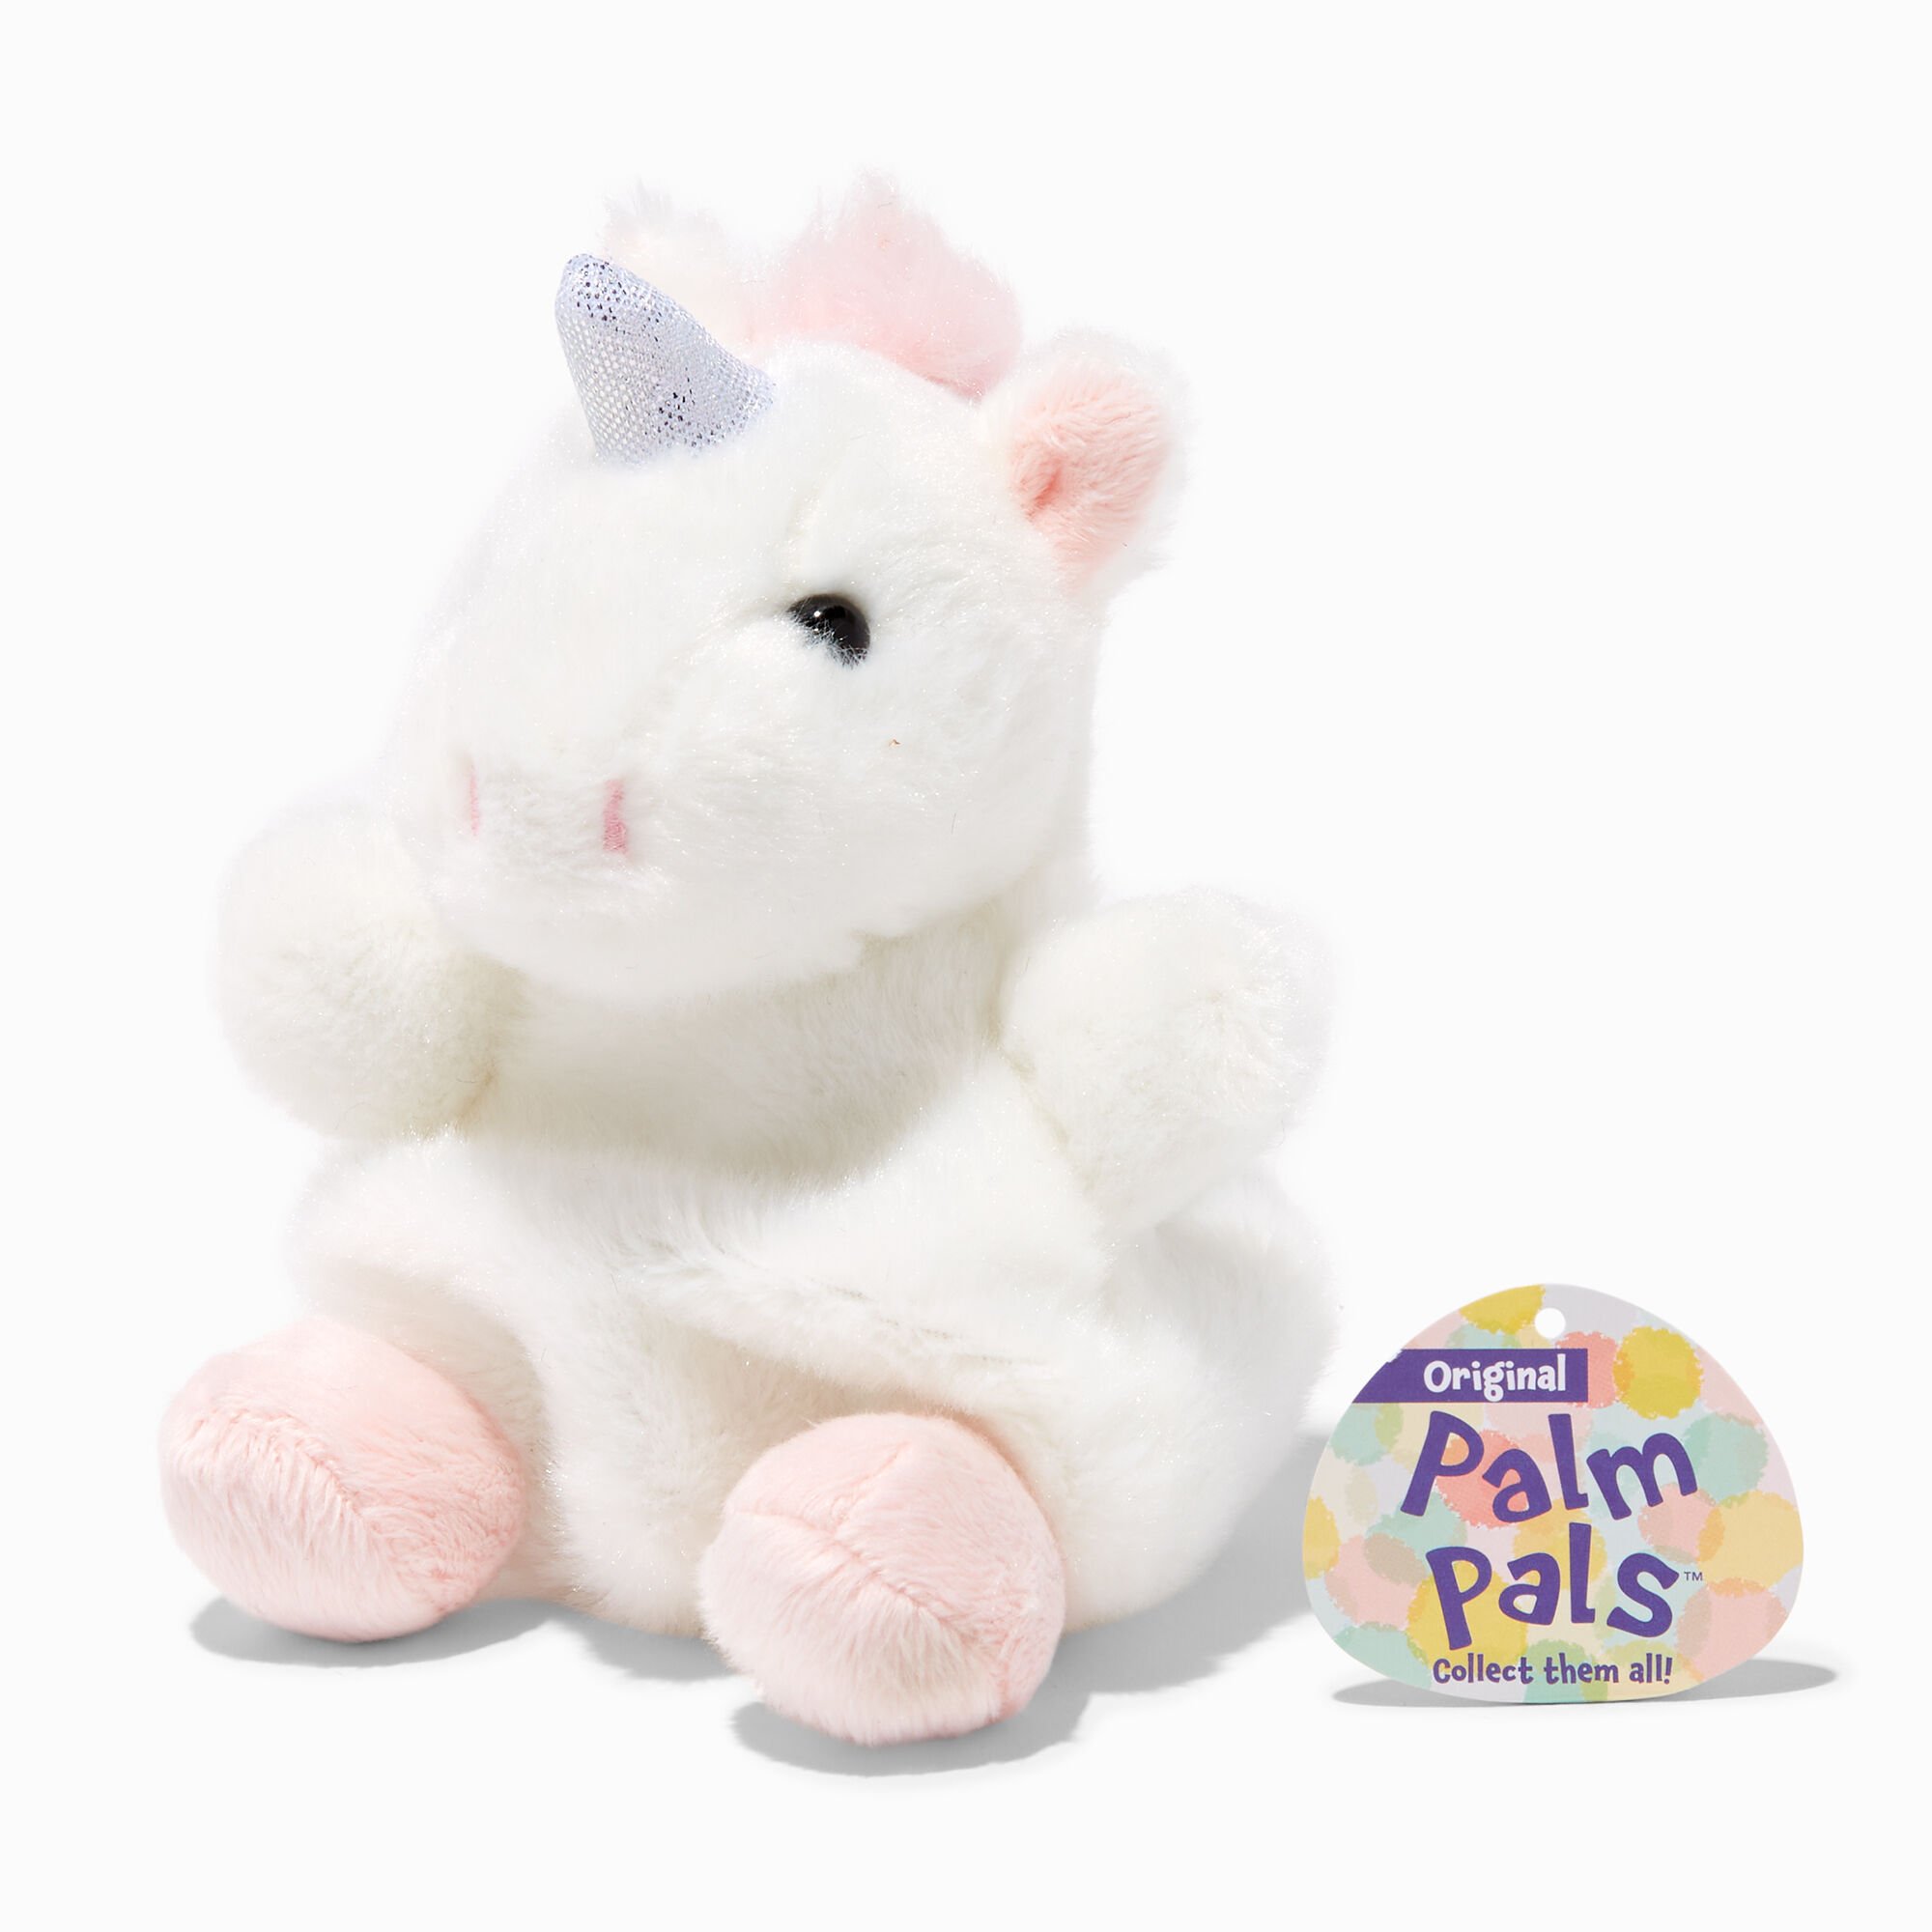 View Claires Palm Pals Sassy 5 Plush Toy information